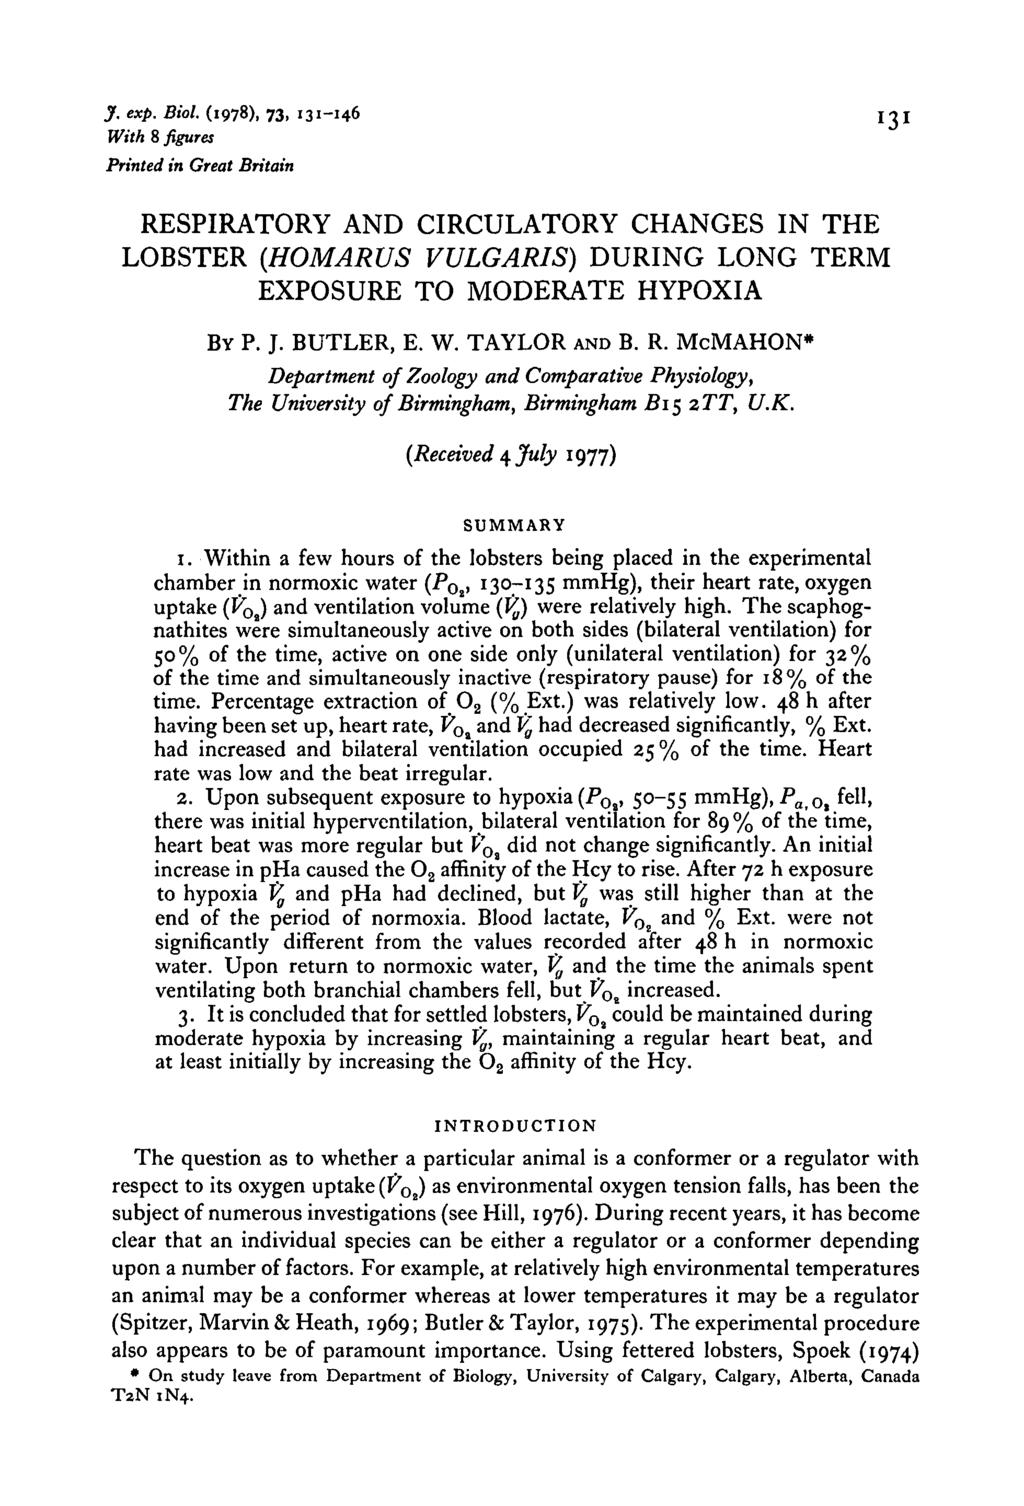 J. exp. Biol, (1978), 73. 131-146 131 With 8 figures Printed in Great Britain RESPIRATORY AND CIRCULATORY CHANGES IN THE LOBSTER (HOMARUS VULGARIS) DURING LONG TERM EXPOSURE TO MODERATE HYPOXIA BY P.